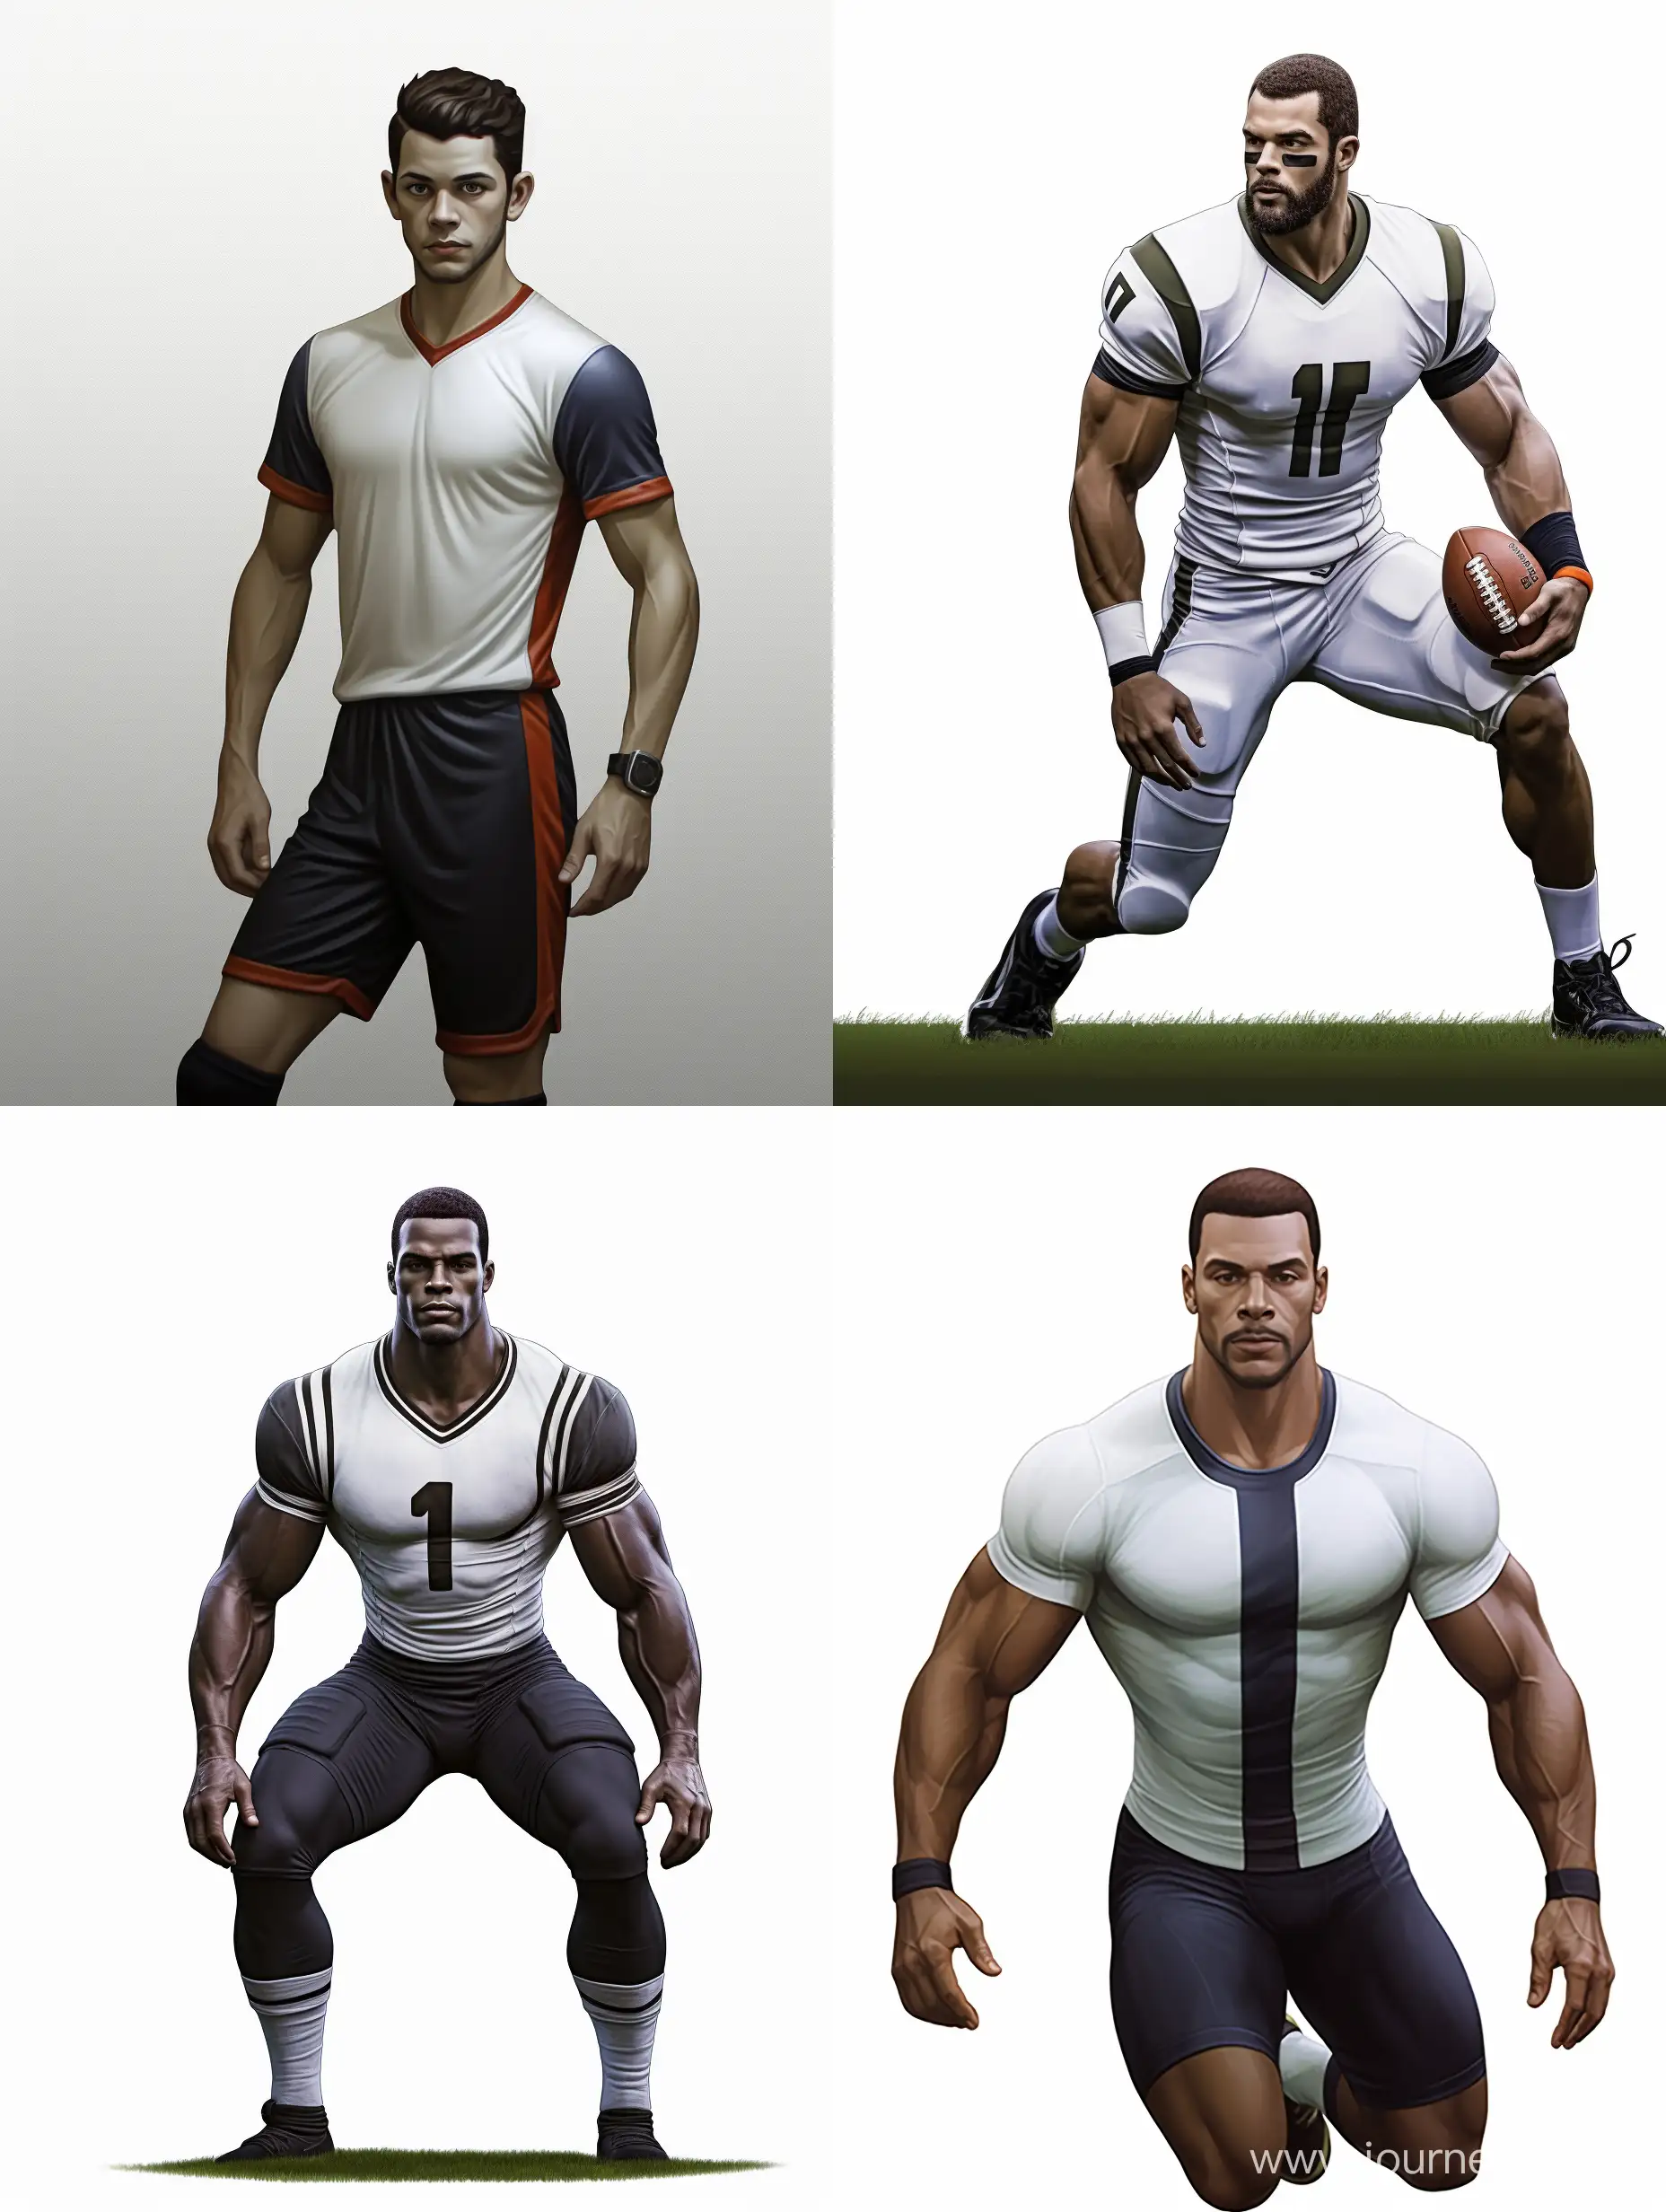 Versatile-Athlete-Transforms-into-Muscular-Orc-Prince-in-HighResolution-8K-Image